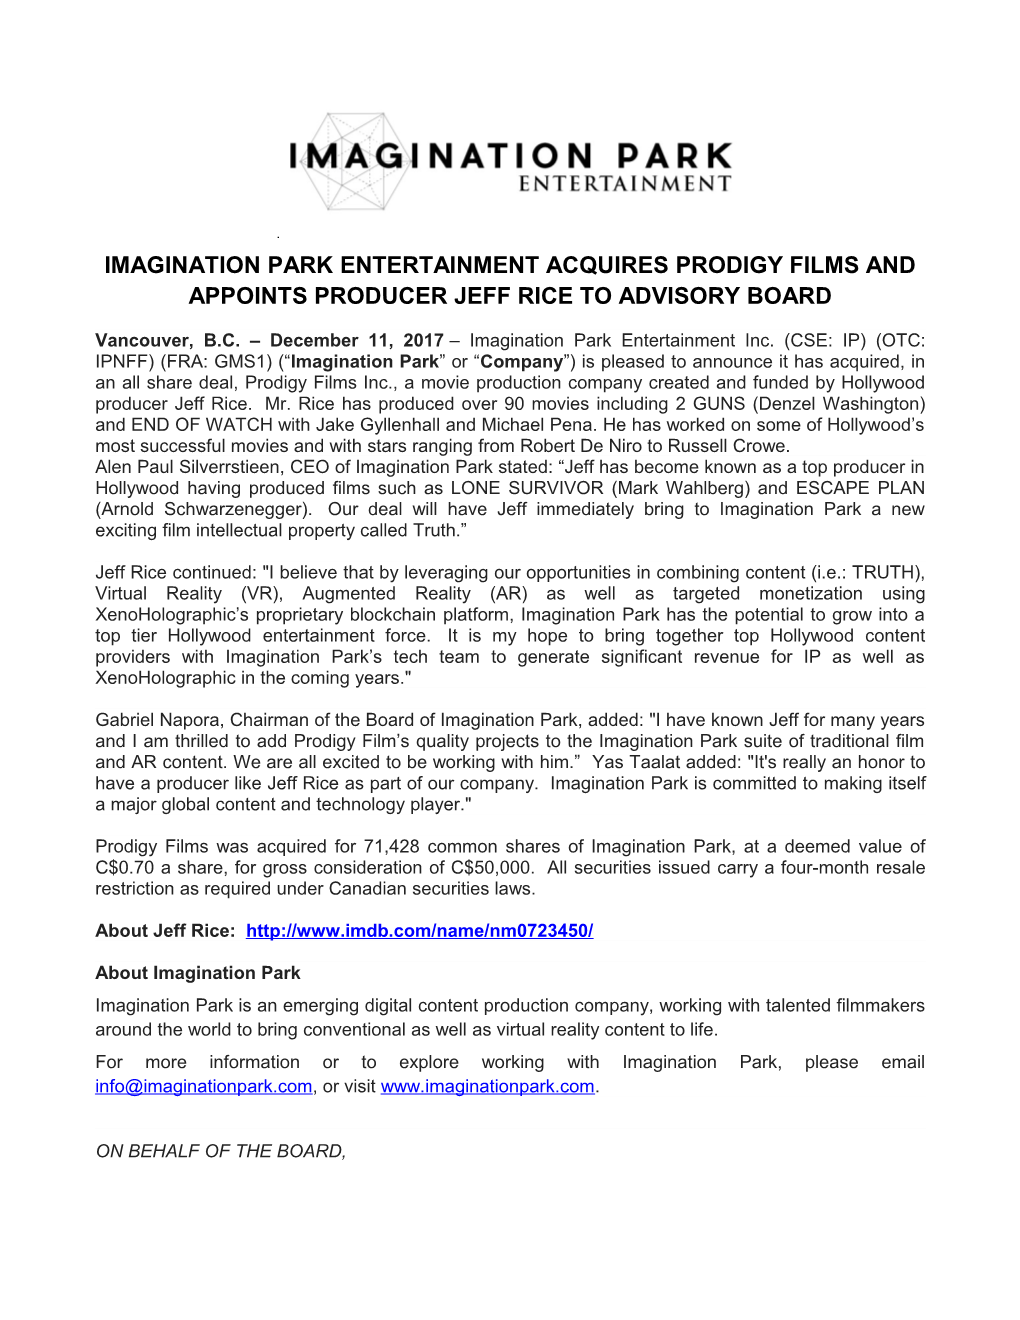 Imagination Park Entertainment Acquires Prodigy Films and Appoints Producer Jeff Rice